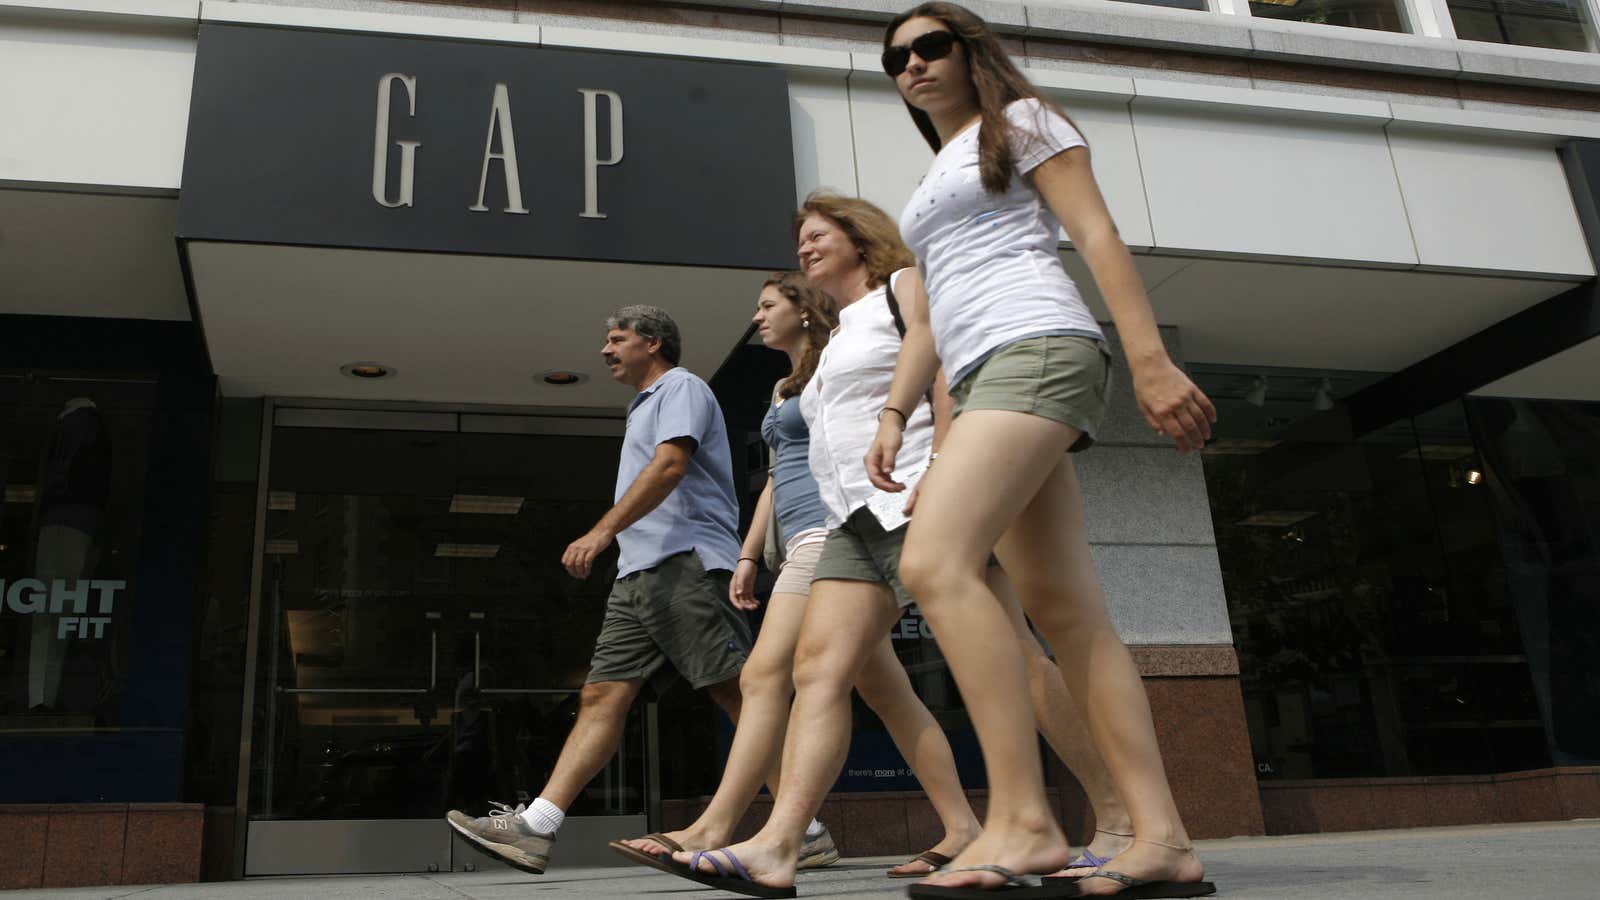 Gap is rapidly expanding into emerging markets.